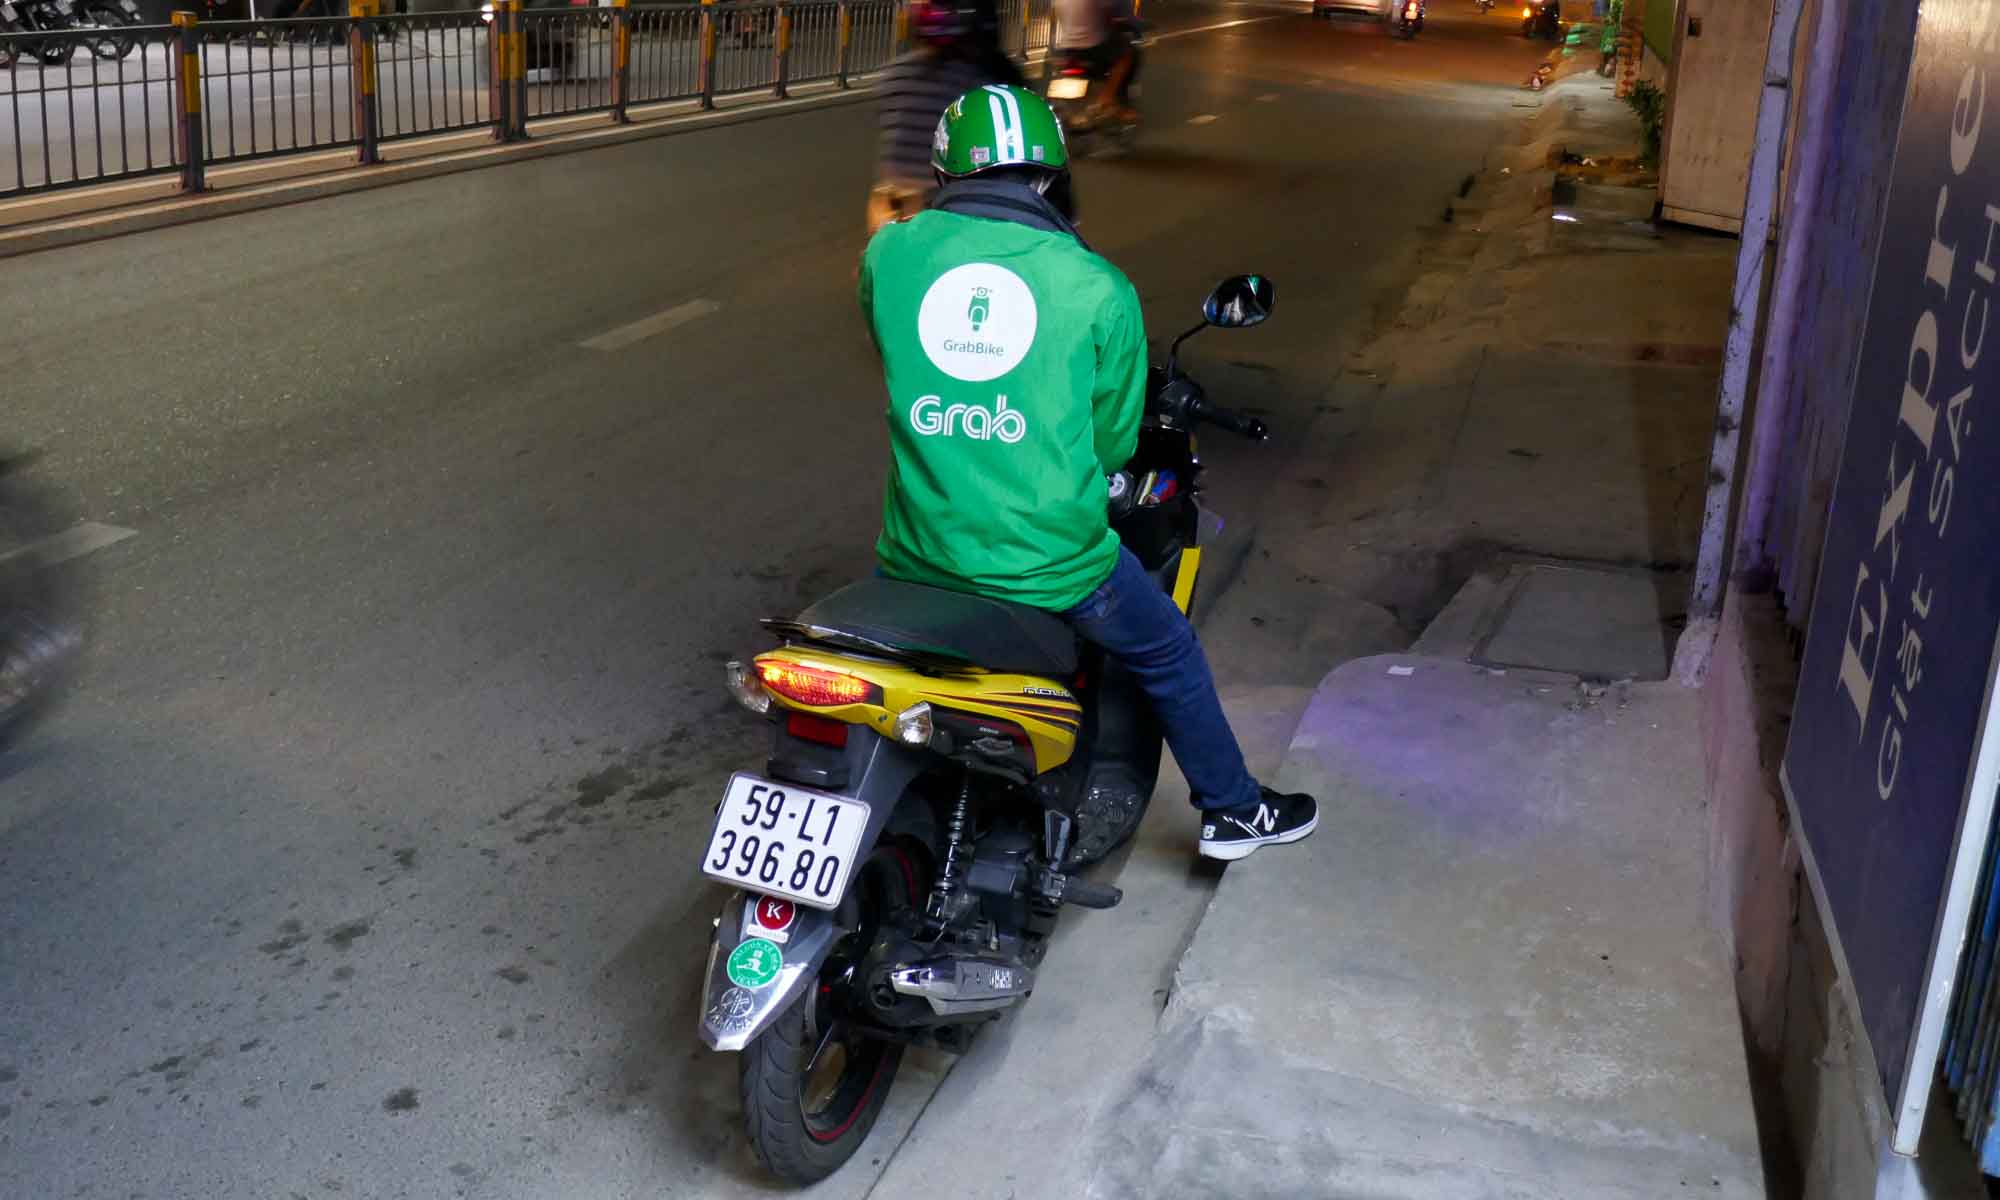 For a single person GrabBike is also an option